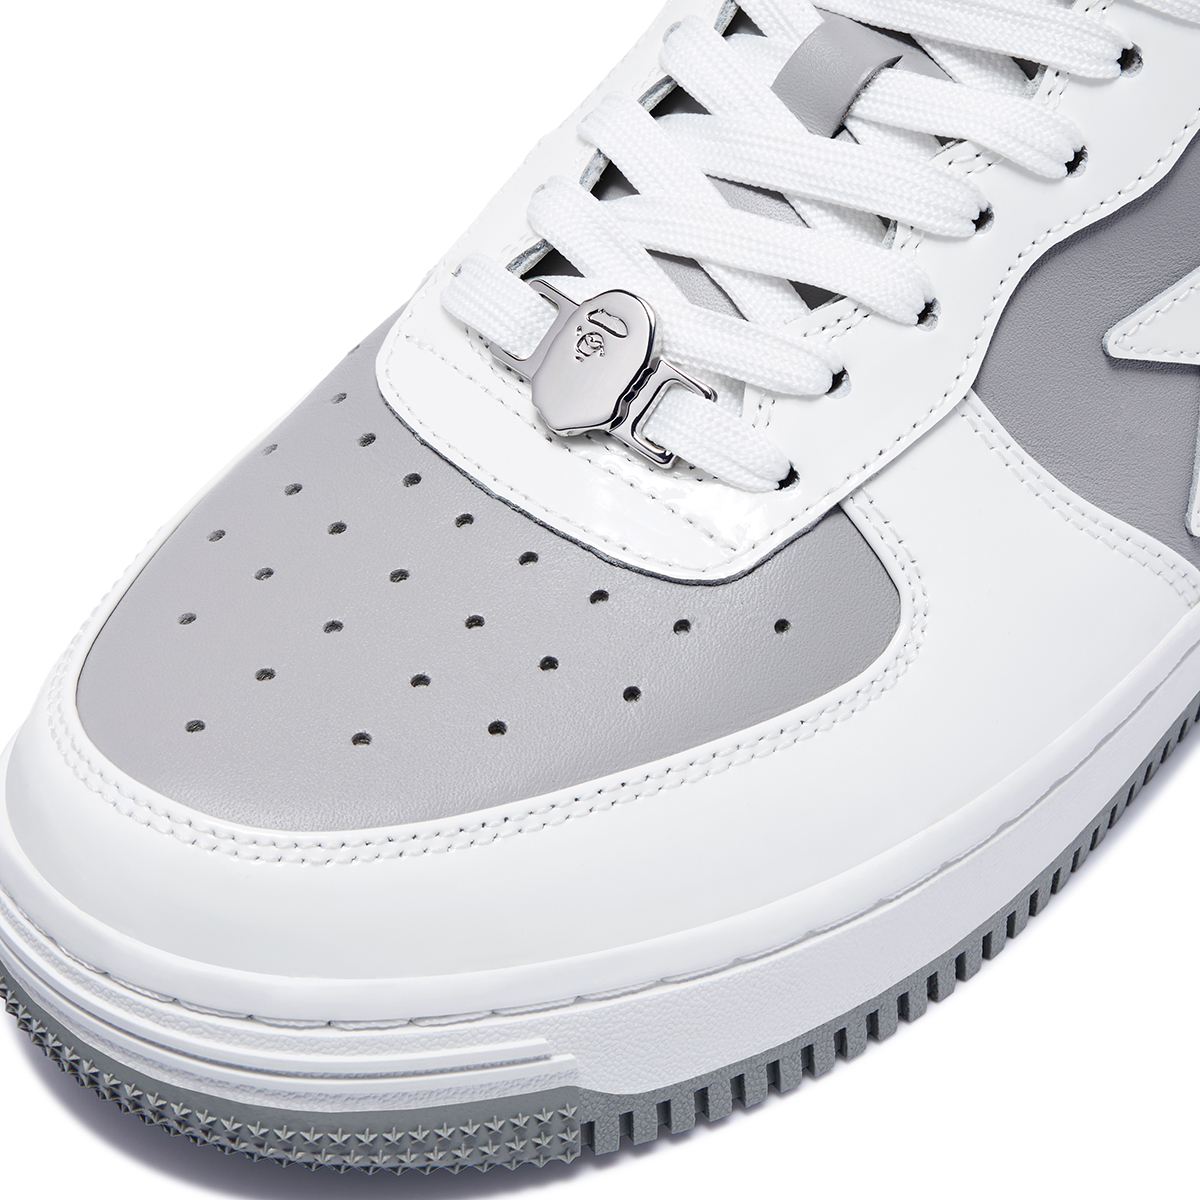 Nike Icon Air Force 1 Low 07 Custom Butterfly Patent Leather White Grey 4